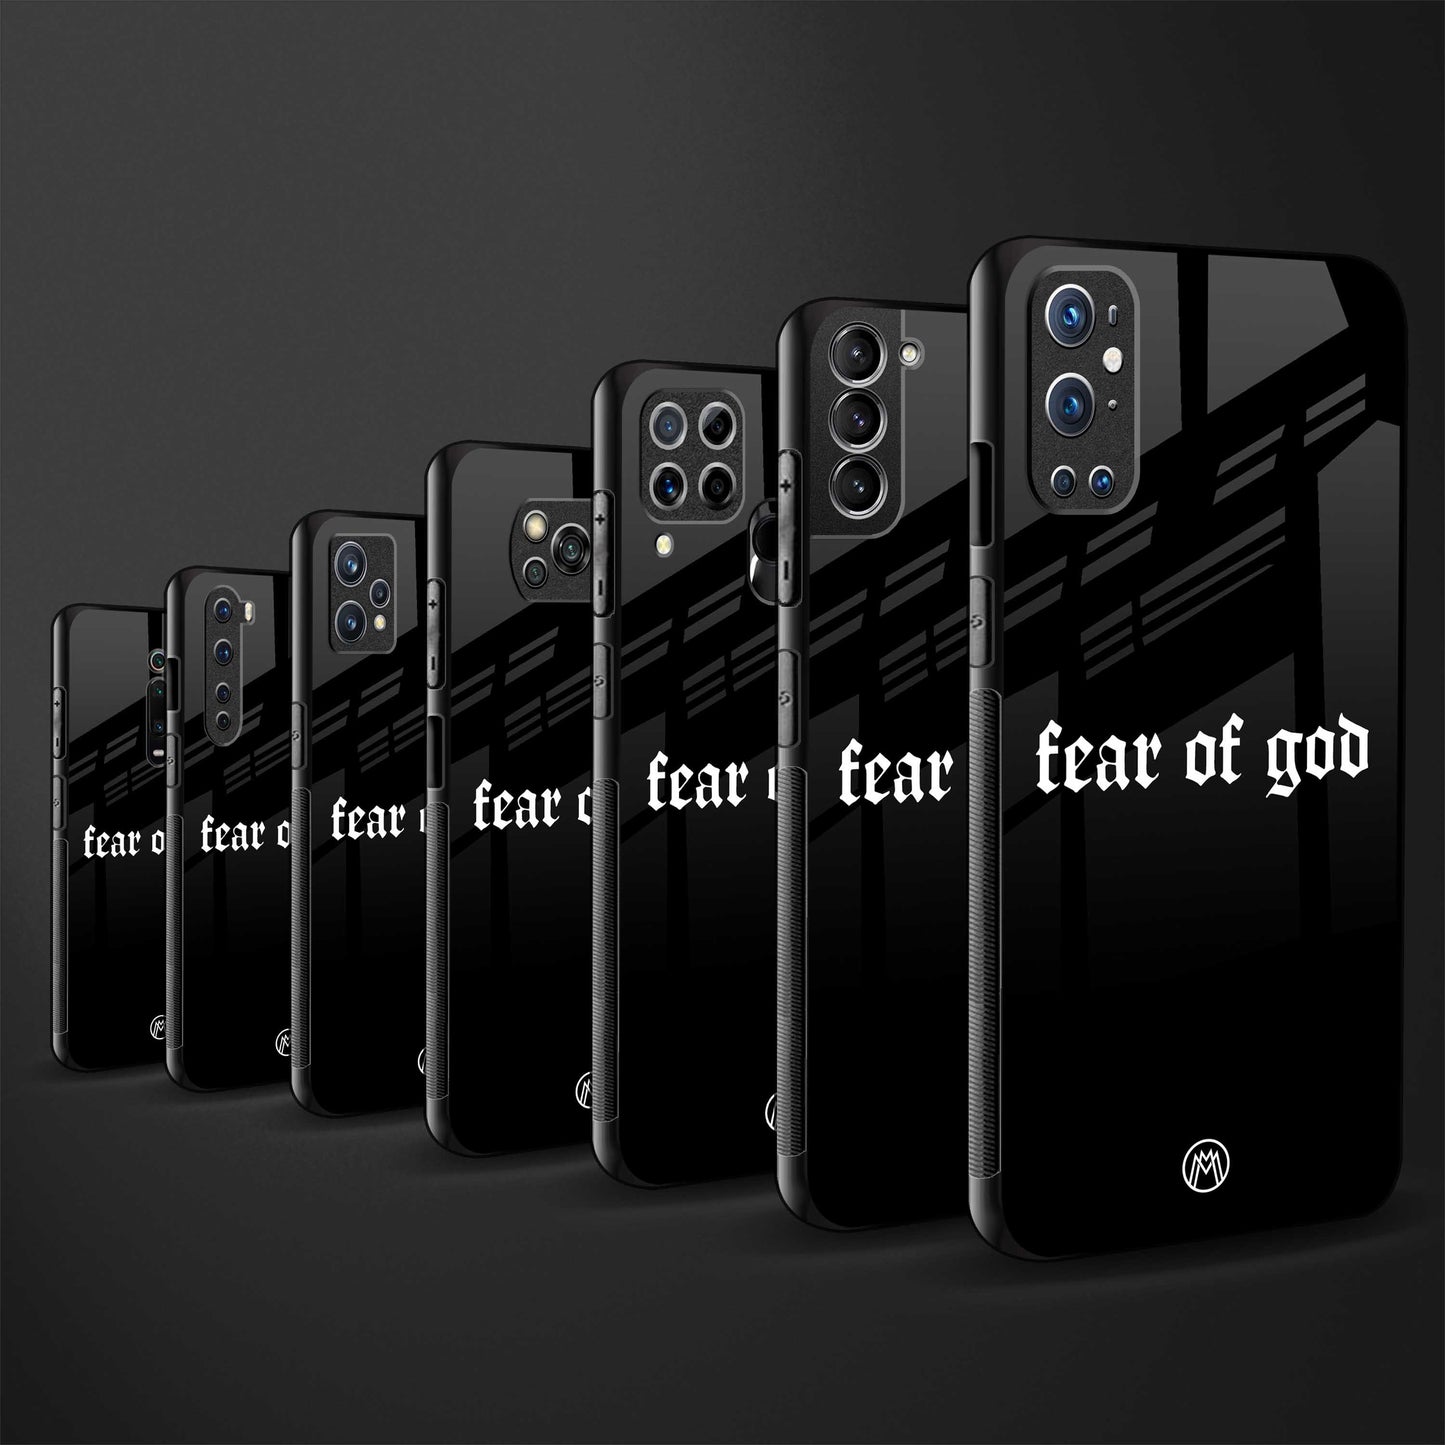 fear of god phone cover for redmi note 9